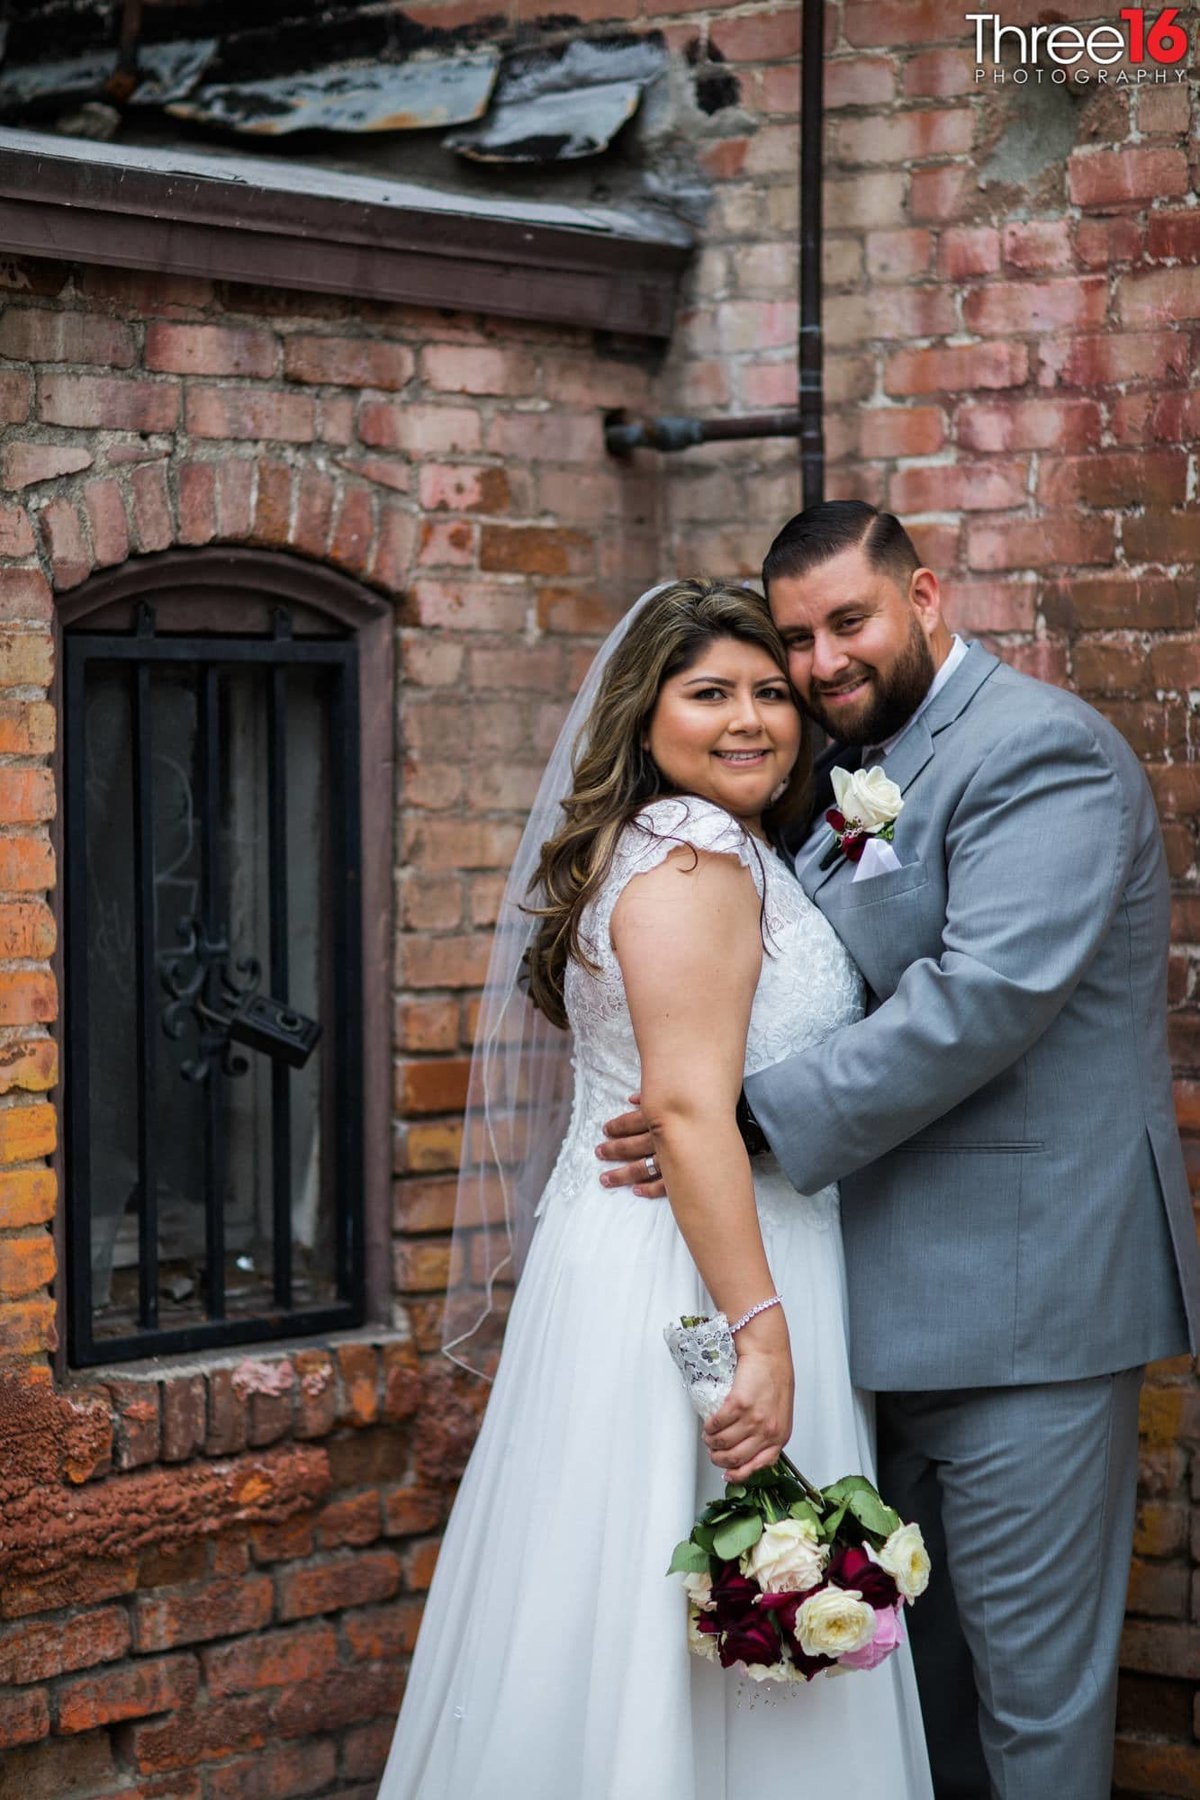 Gentle embrace between Bride and Groom in back ally of Downtown Orange with brick walls behind them